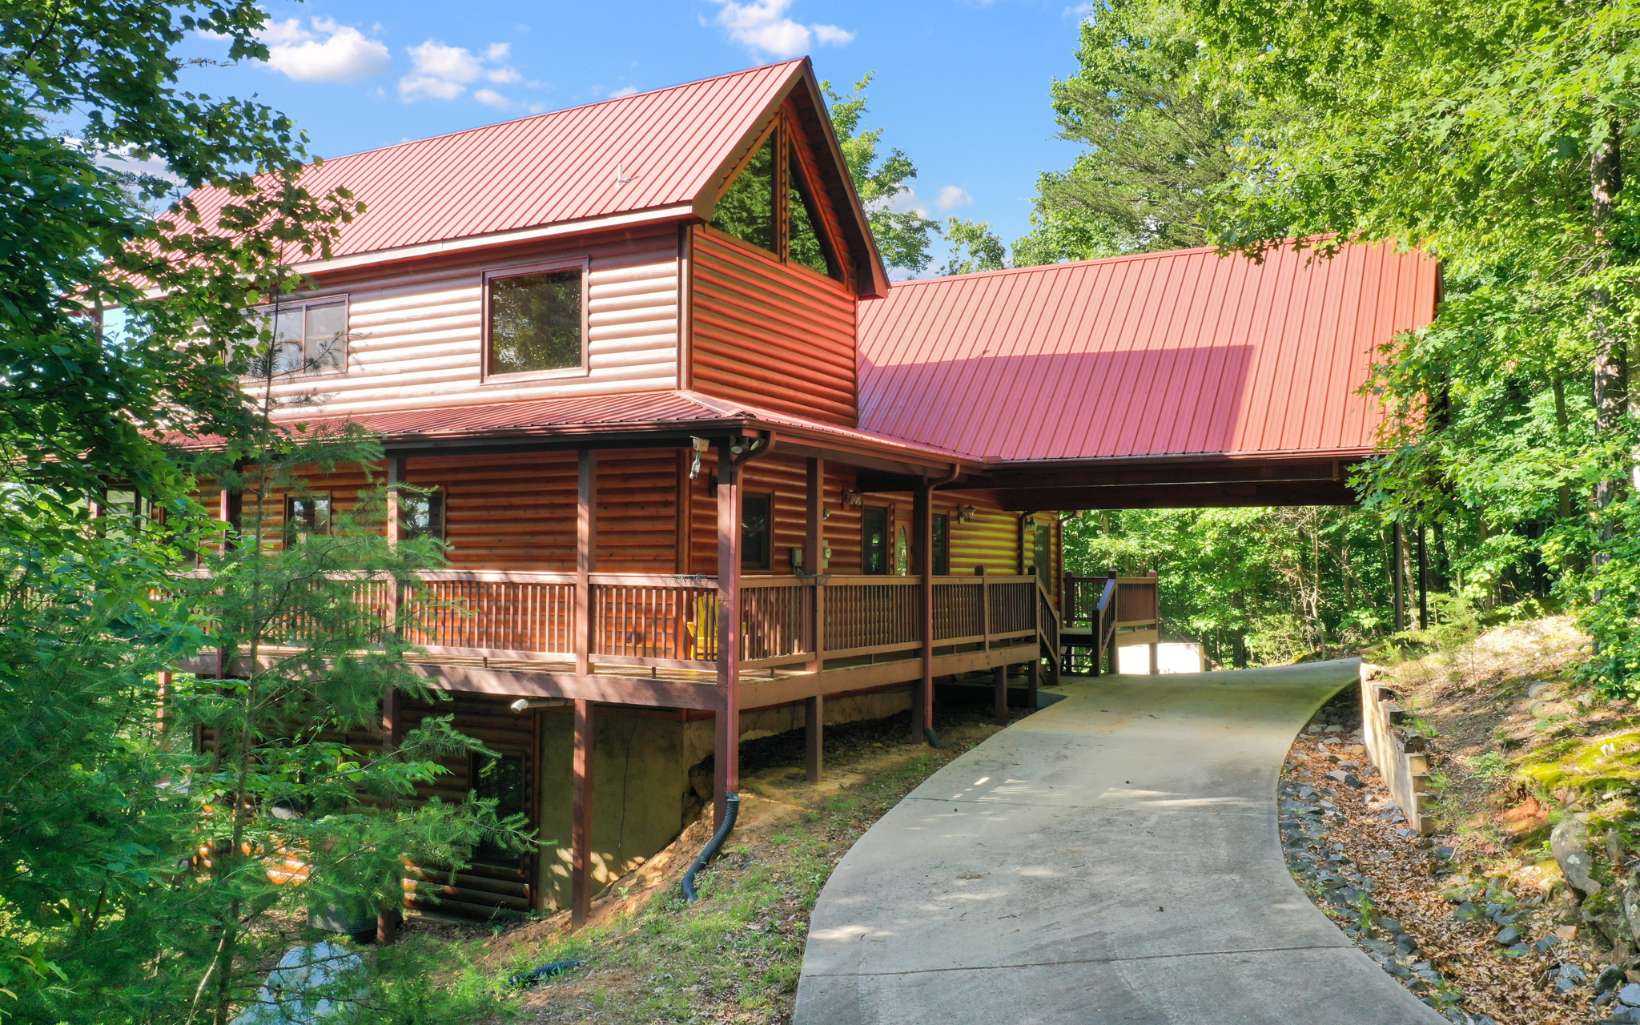 Bring All the Family or your Favorite Friends to this Gorgeous Cabin in the North Ga. Mountains situated on one of the highest peaks around (Piney Mtn.). 3 BR/ 3 BA Log Sided Cabin with a Long-Range Mountain View (Improved with a small amount of tree topping). All paved access & less than 15 minutes to downtown Blue Ridge, Blue Ridge Lake or the Toccoa River. Huge screen porch on the view side, wrap around porches, metal roof. Master offers a private porch, fireplace, spacious master bath, jetted tub & tile shower & double vanities. Actually, you could have 2 masters no problem. The lower-level game room & the living area on the main floor are very accommodating for several people to gather. Prepare your meals while enjoying the mountain view, then sit at the separate dining area, same great view. On demand hot water, Plenty of parking here, circle drive with log carport + detached garage.